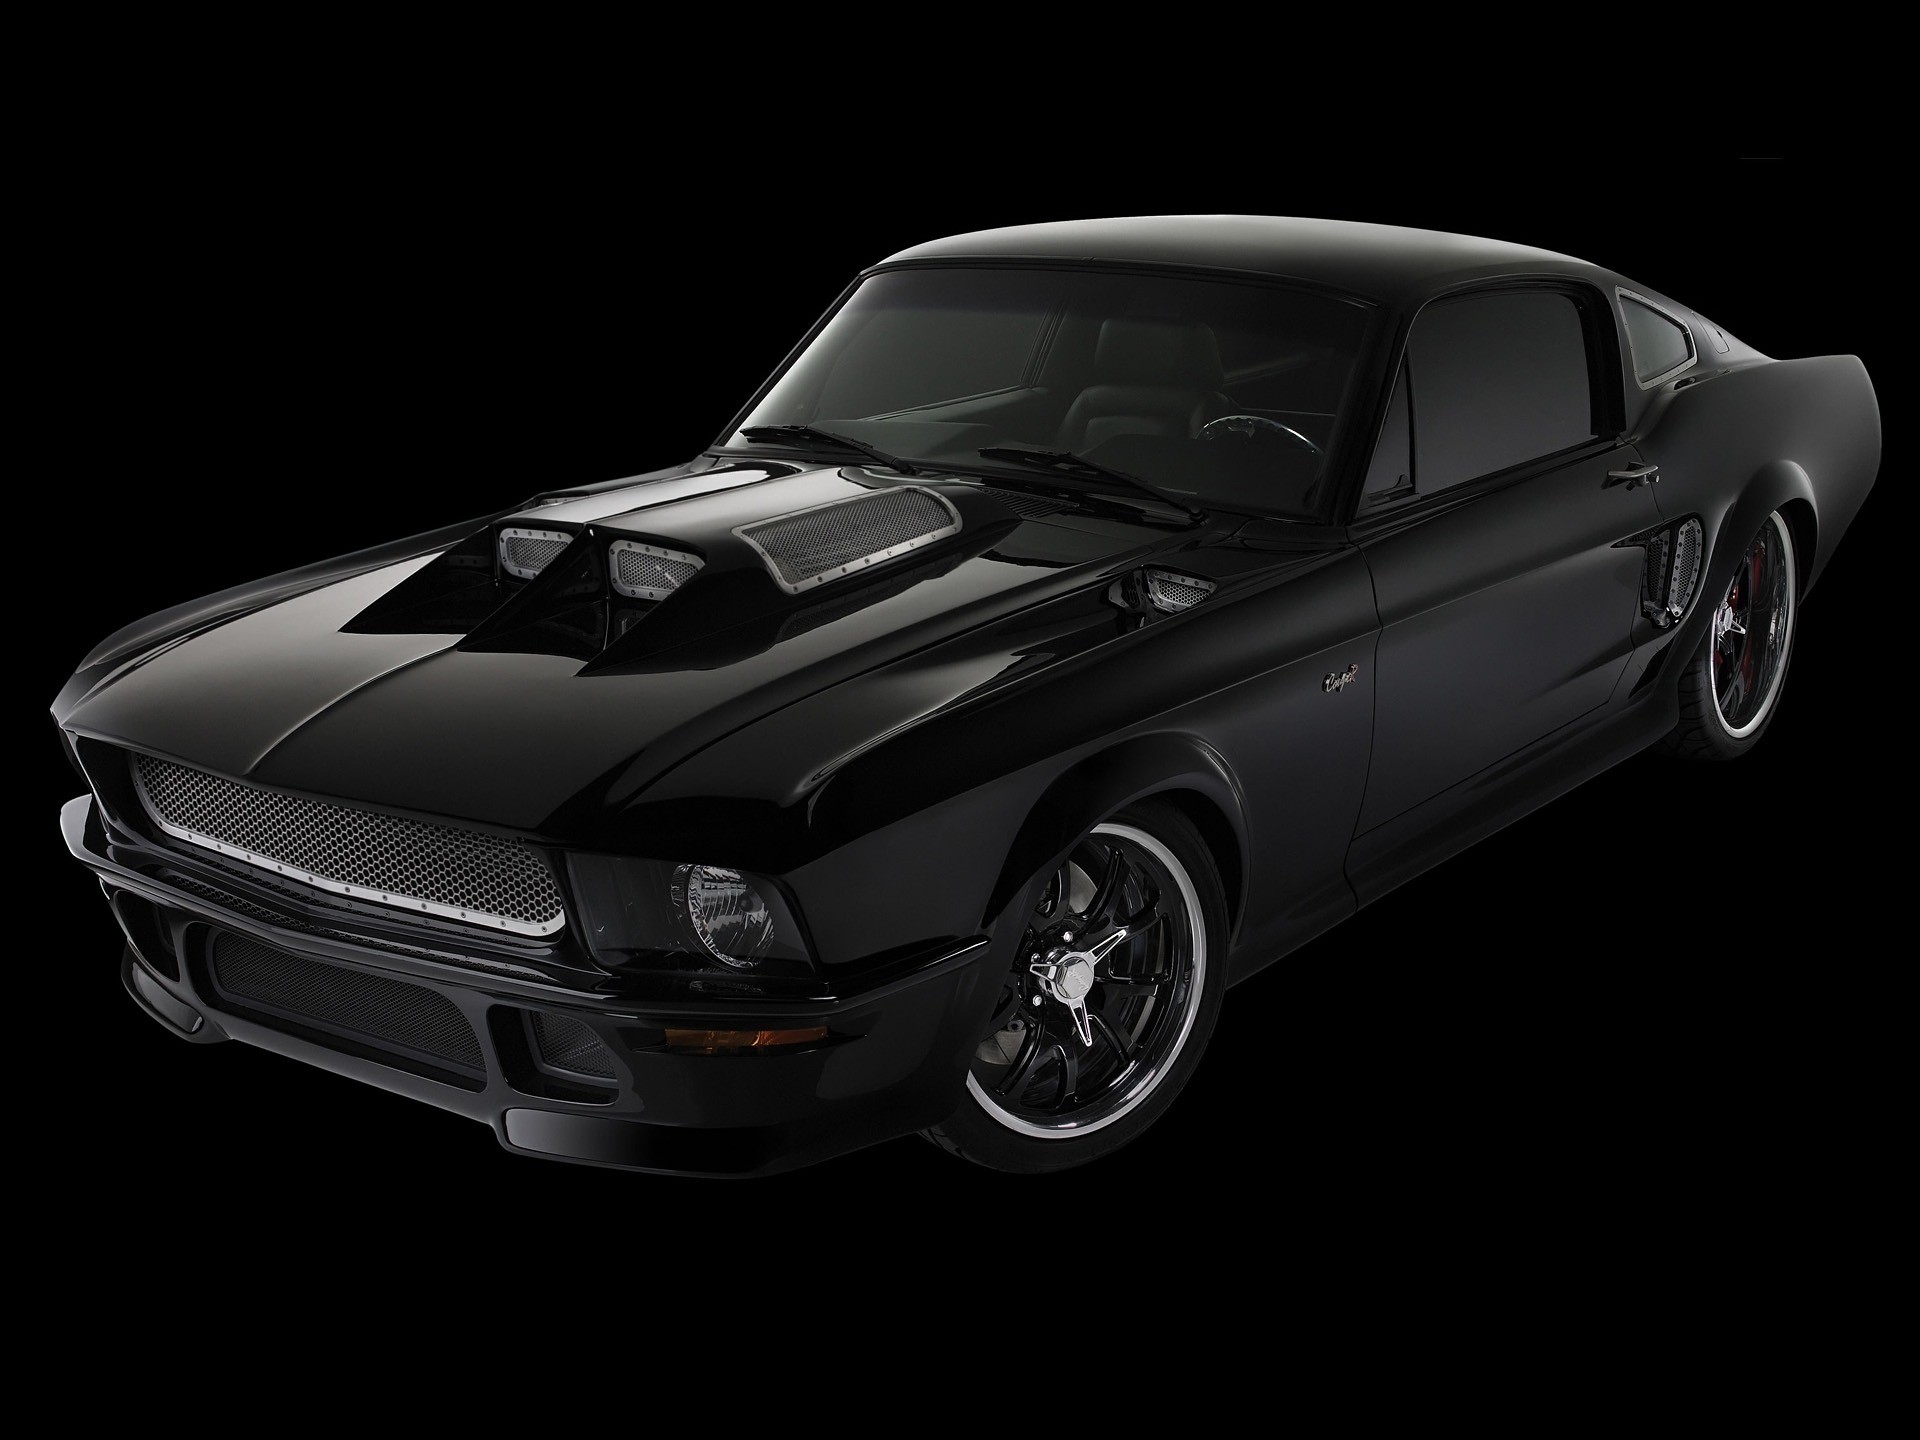 1920x1440 1976 Ford Mustang Wallpaper Muscle Cars Cars (71 Wallpapers)